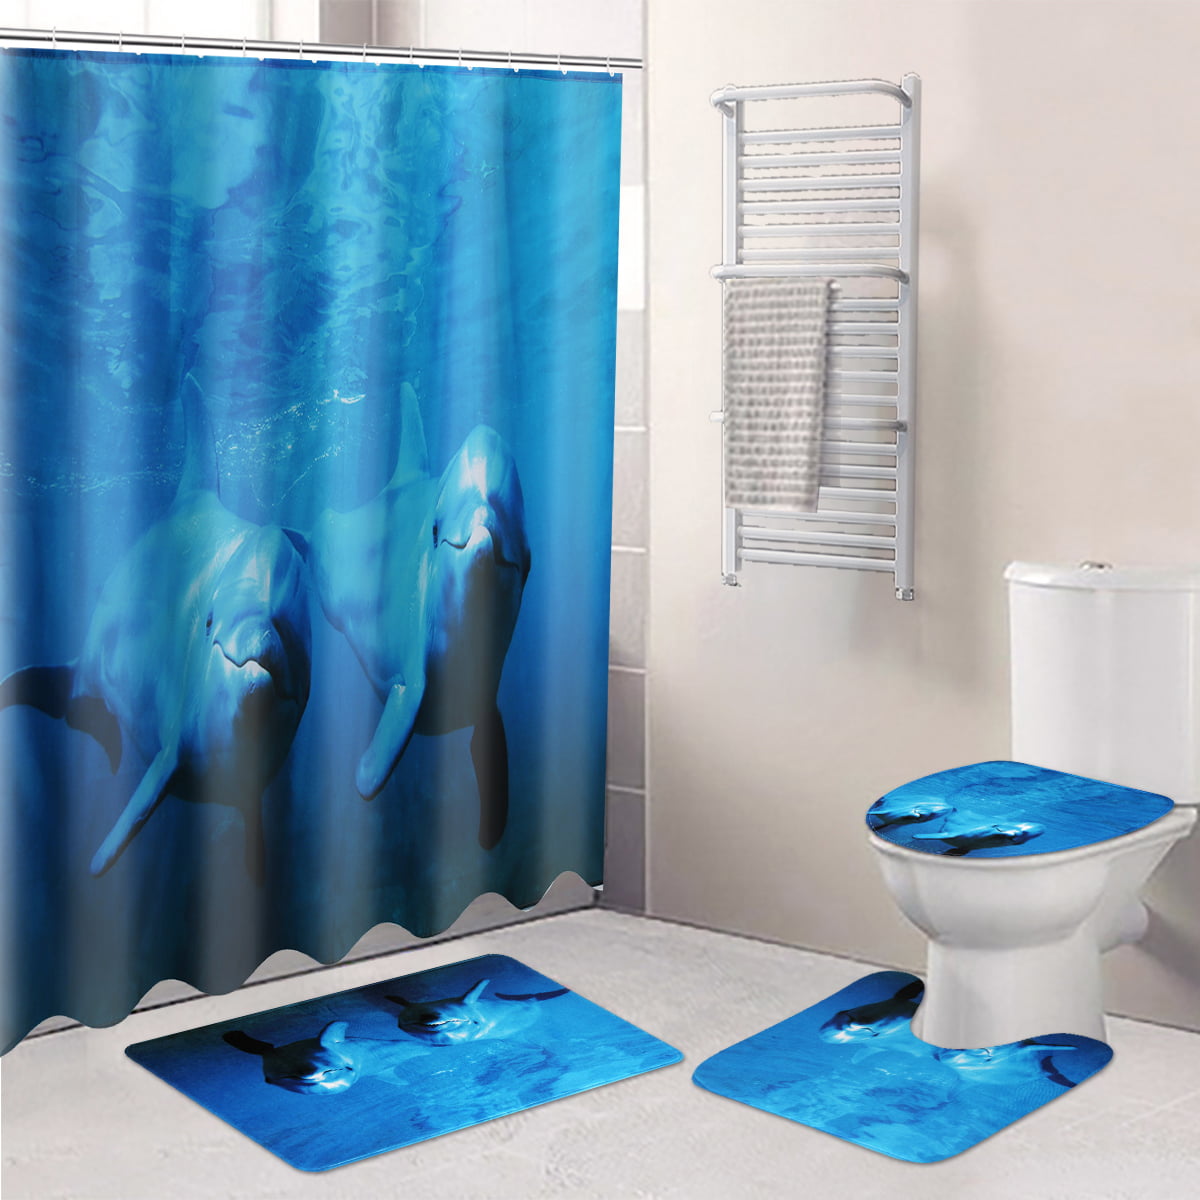 Corals Fishes Under Sea 3D Shower Curtain Polyester Bathroom Decor  Waterproof 